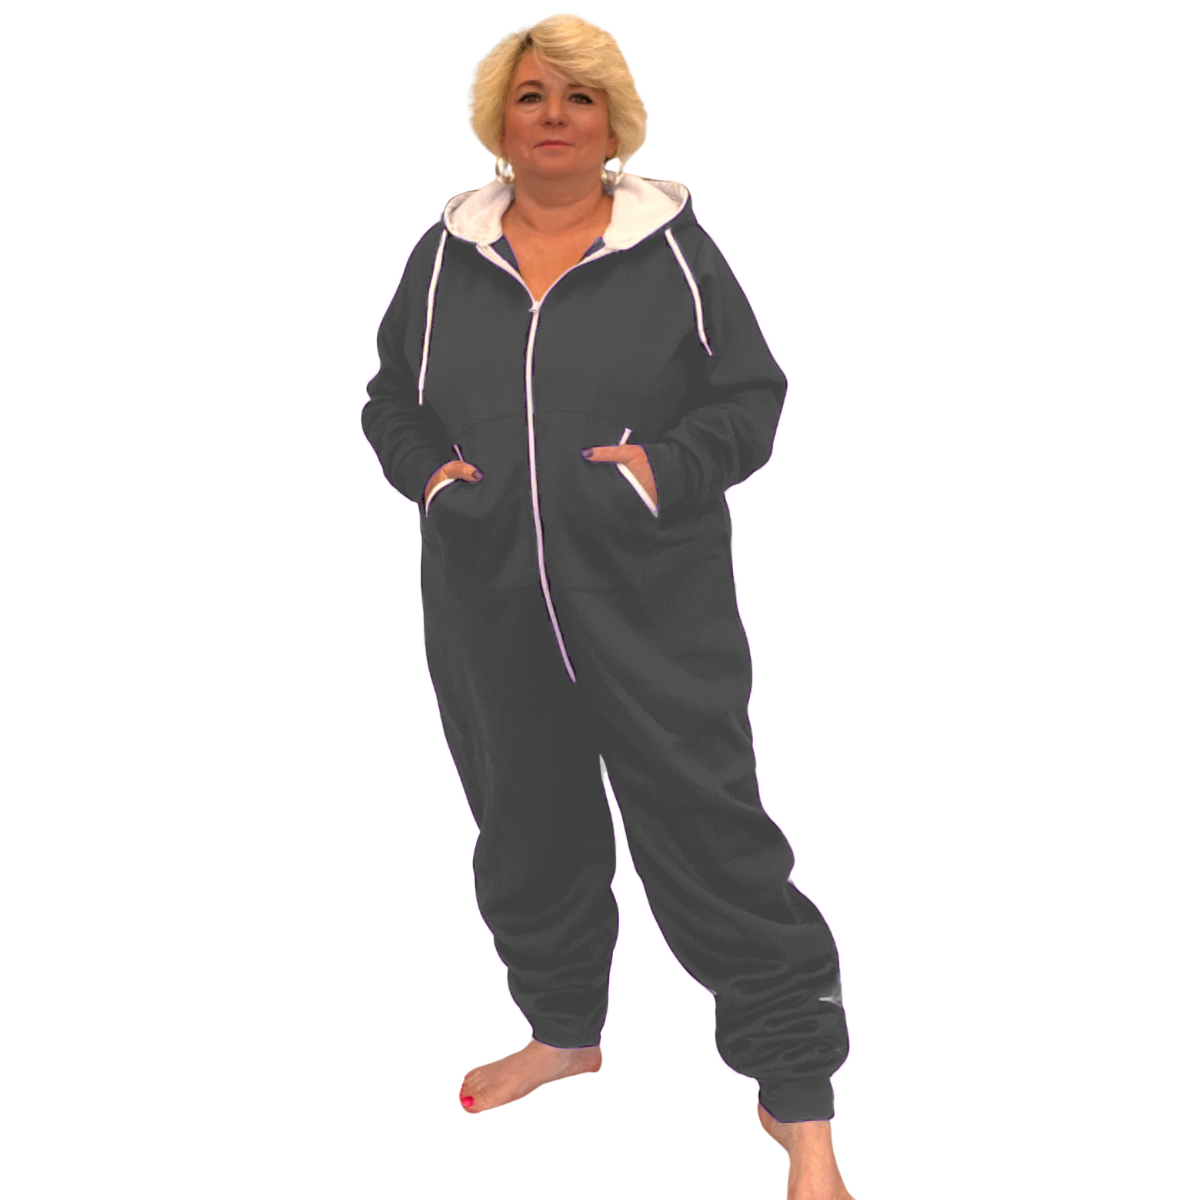 ROCKTHOSECURVES ALL IN ONE LOUNGESUIT PLUS SIZE